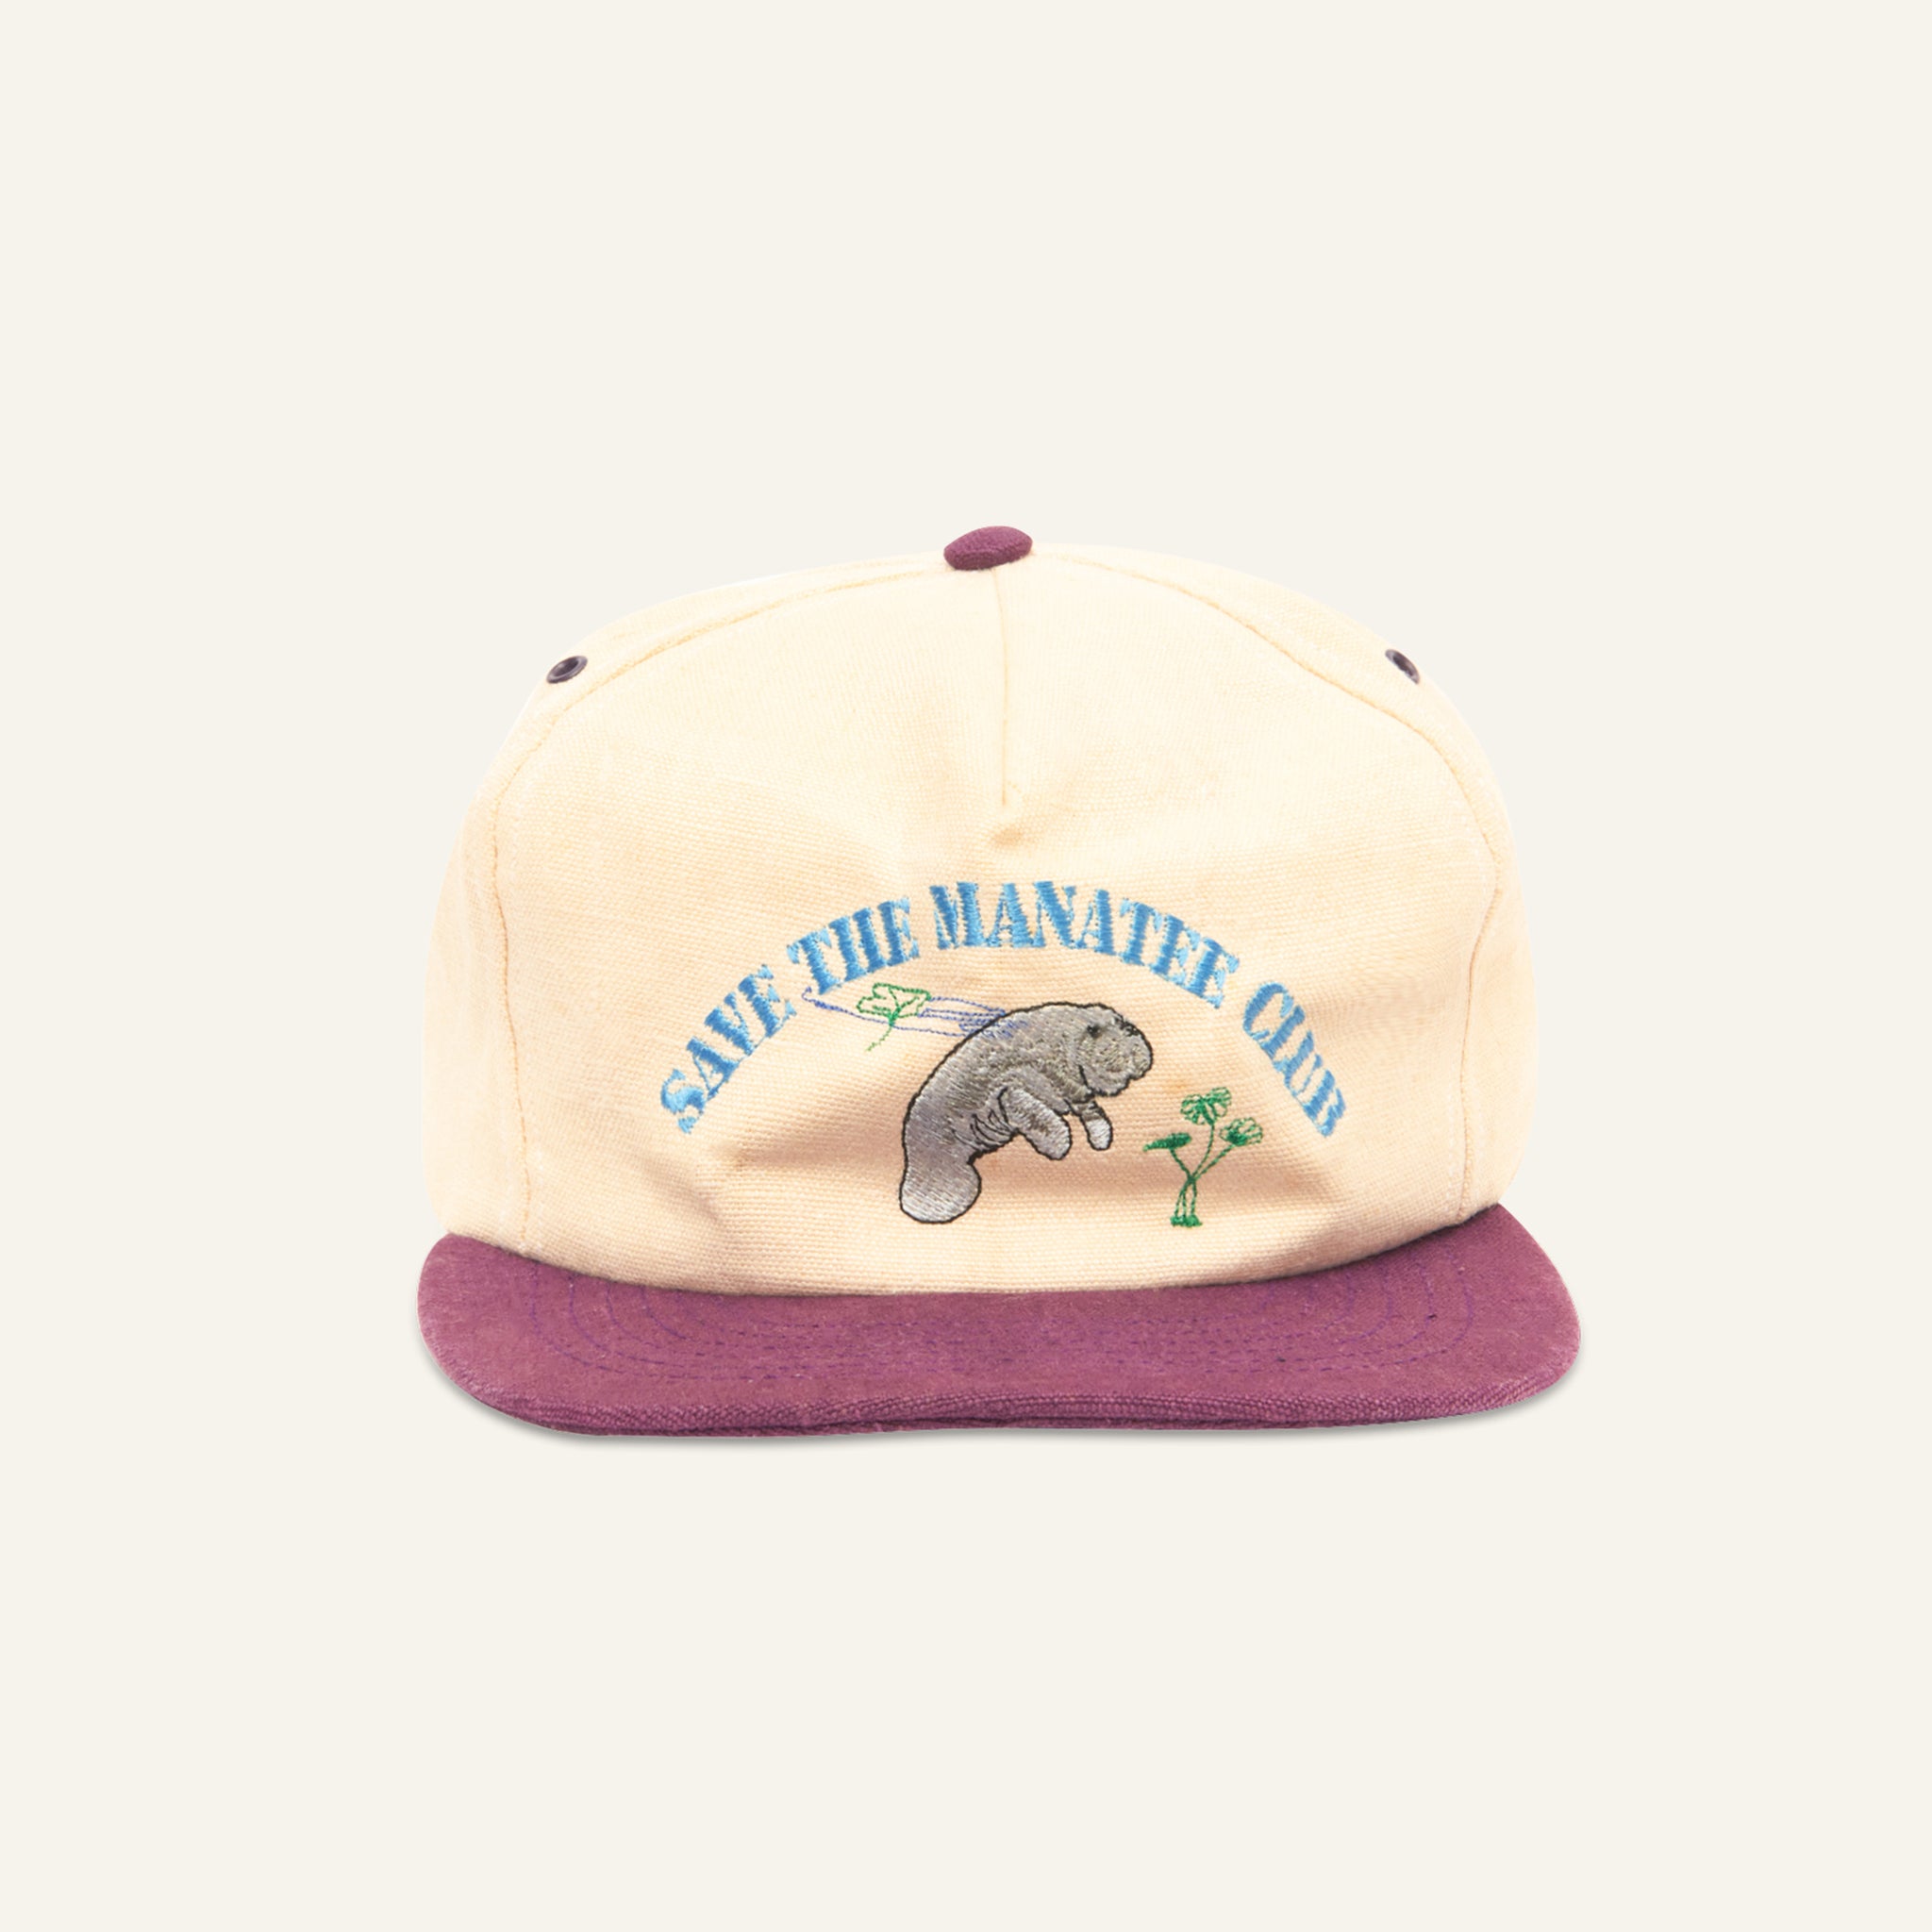 Upcycled Cap #3 ~ "Save The Manatee Club" ~ One Size